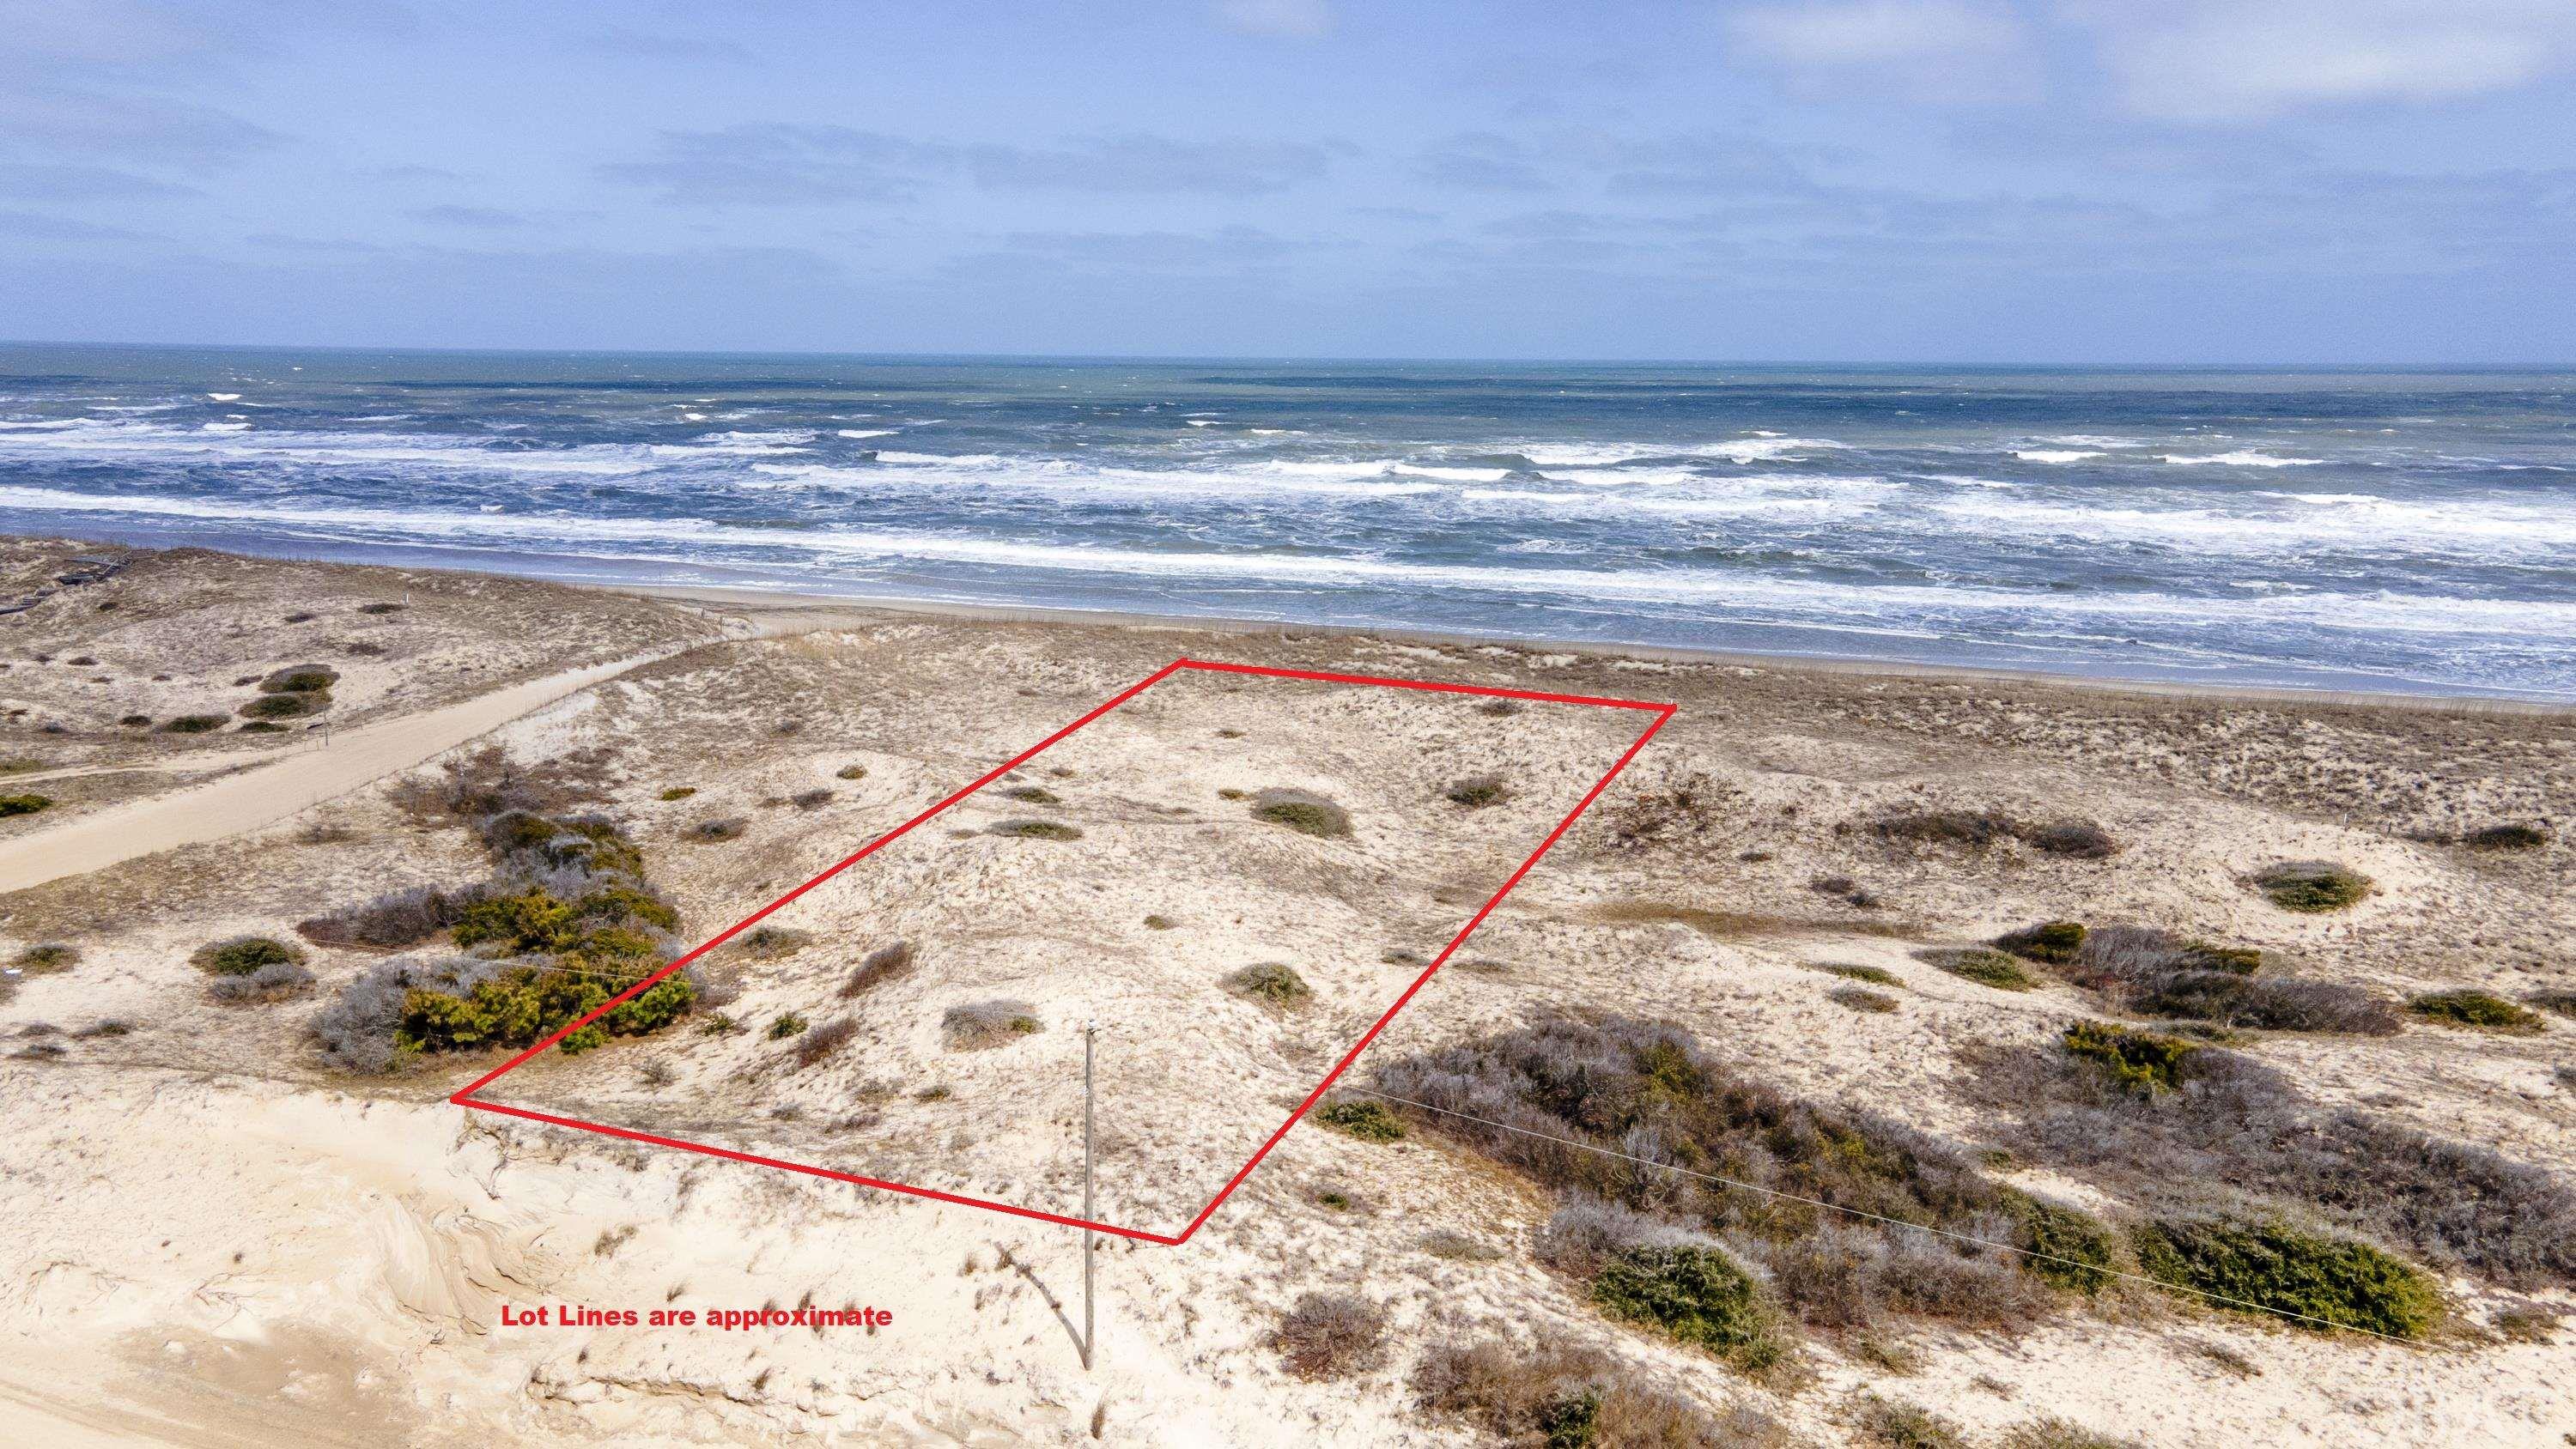 Not your typical Carova oceanfront lot!  Located in the Estates at Carova Beach, this property is 124 feet wide, much wider than the size of the conventional 80' lot.  With a combination of unobstructed views and great elevation, there is a lot of flexibility as to what size house you could build on this oversized lot.   Plenty of room to build a home in the preferred “X-Flood Zone,” which means no flood insurance would be required.  The south side of the property has a 30 foot easement that gives you even more of a buffer zone from your neighbor.  Ask listing agent for sample rental projections for different size homes.